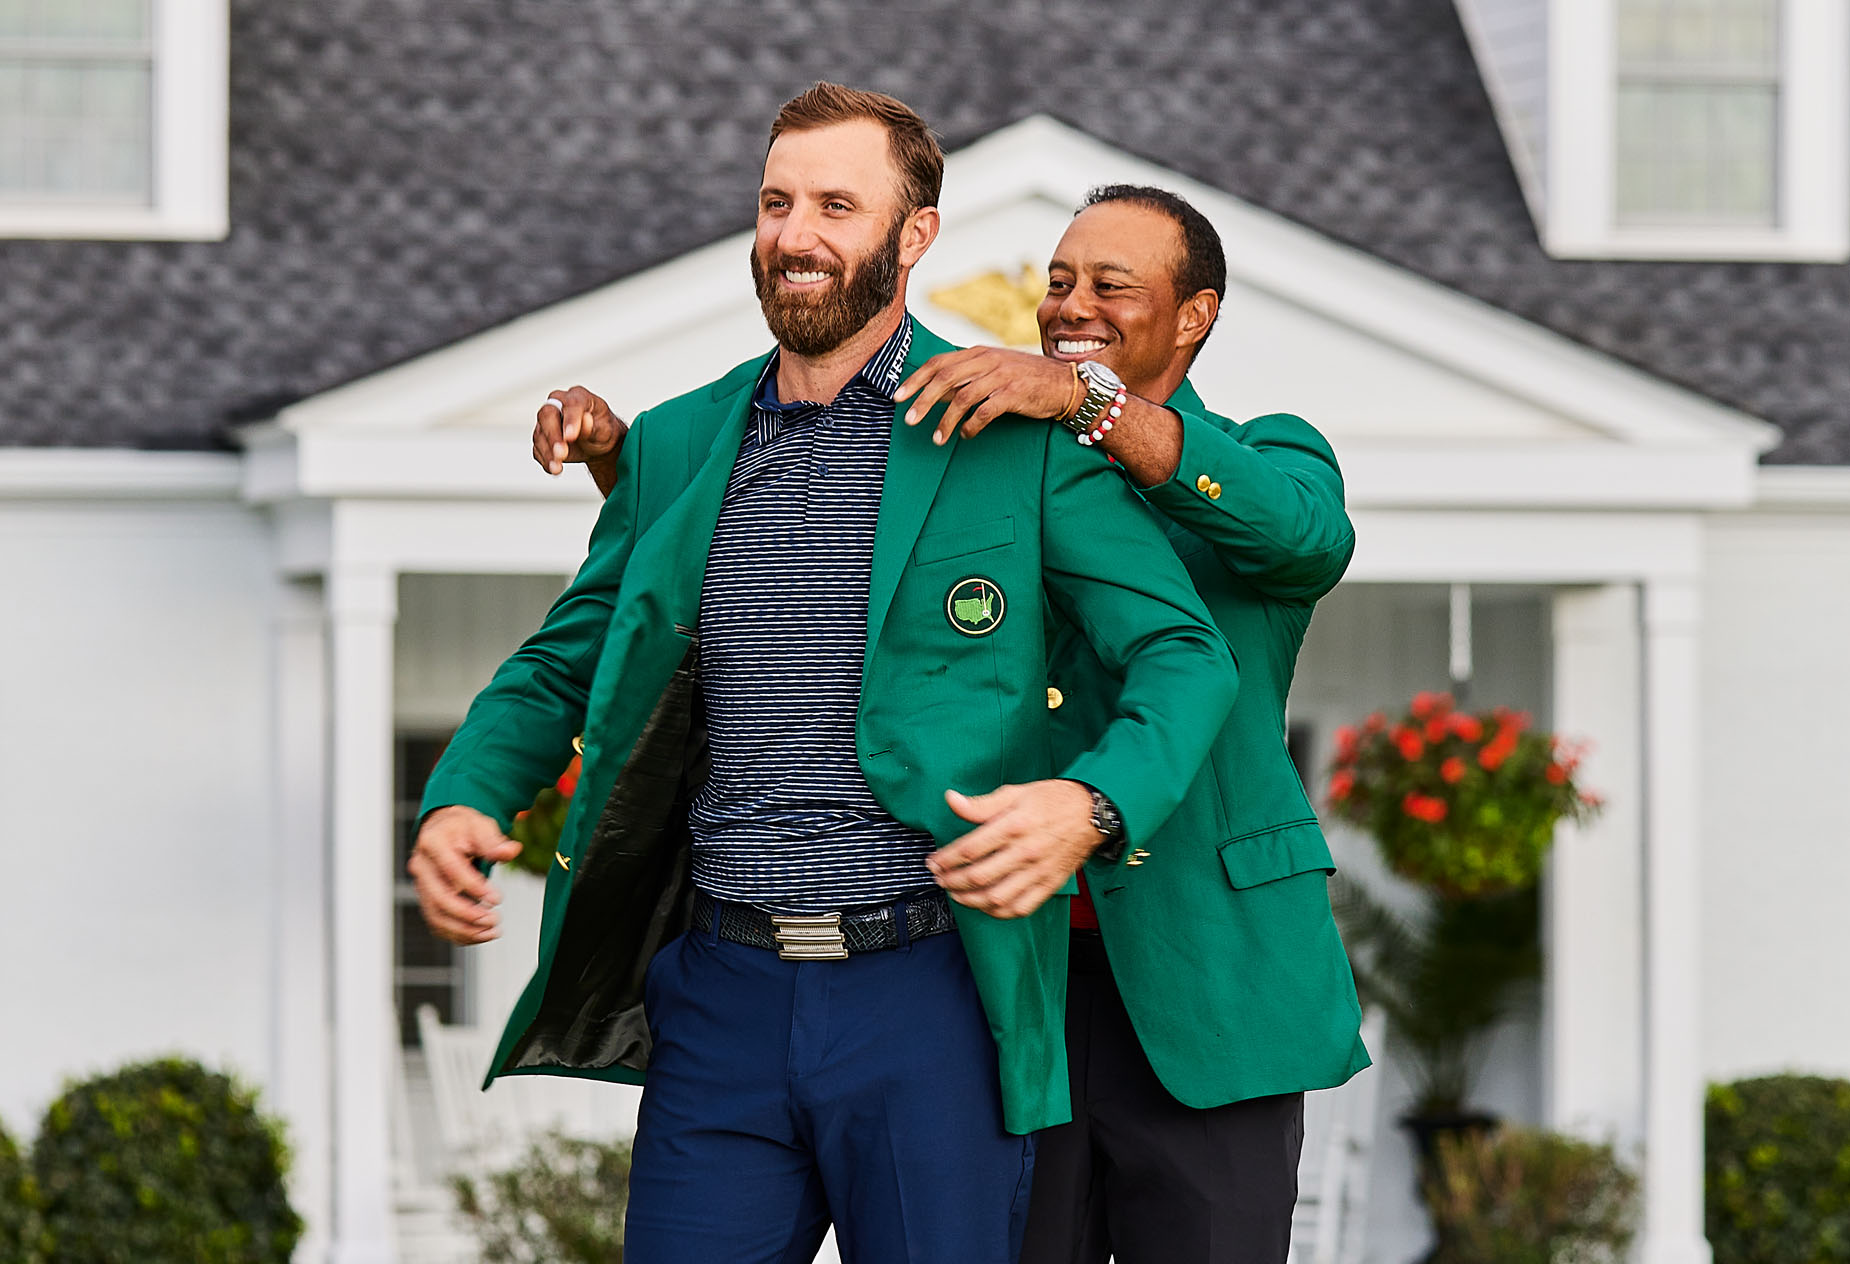 The 2020 Masters - Golf Magazine - Stephen Denton Photography - Los Angeles, CA Commercial Photographer